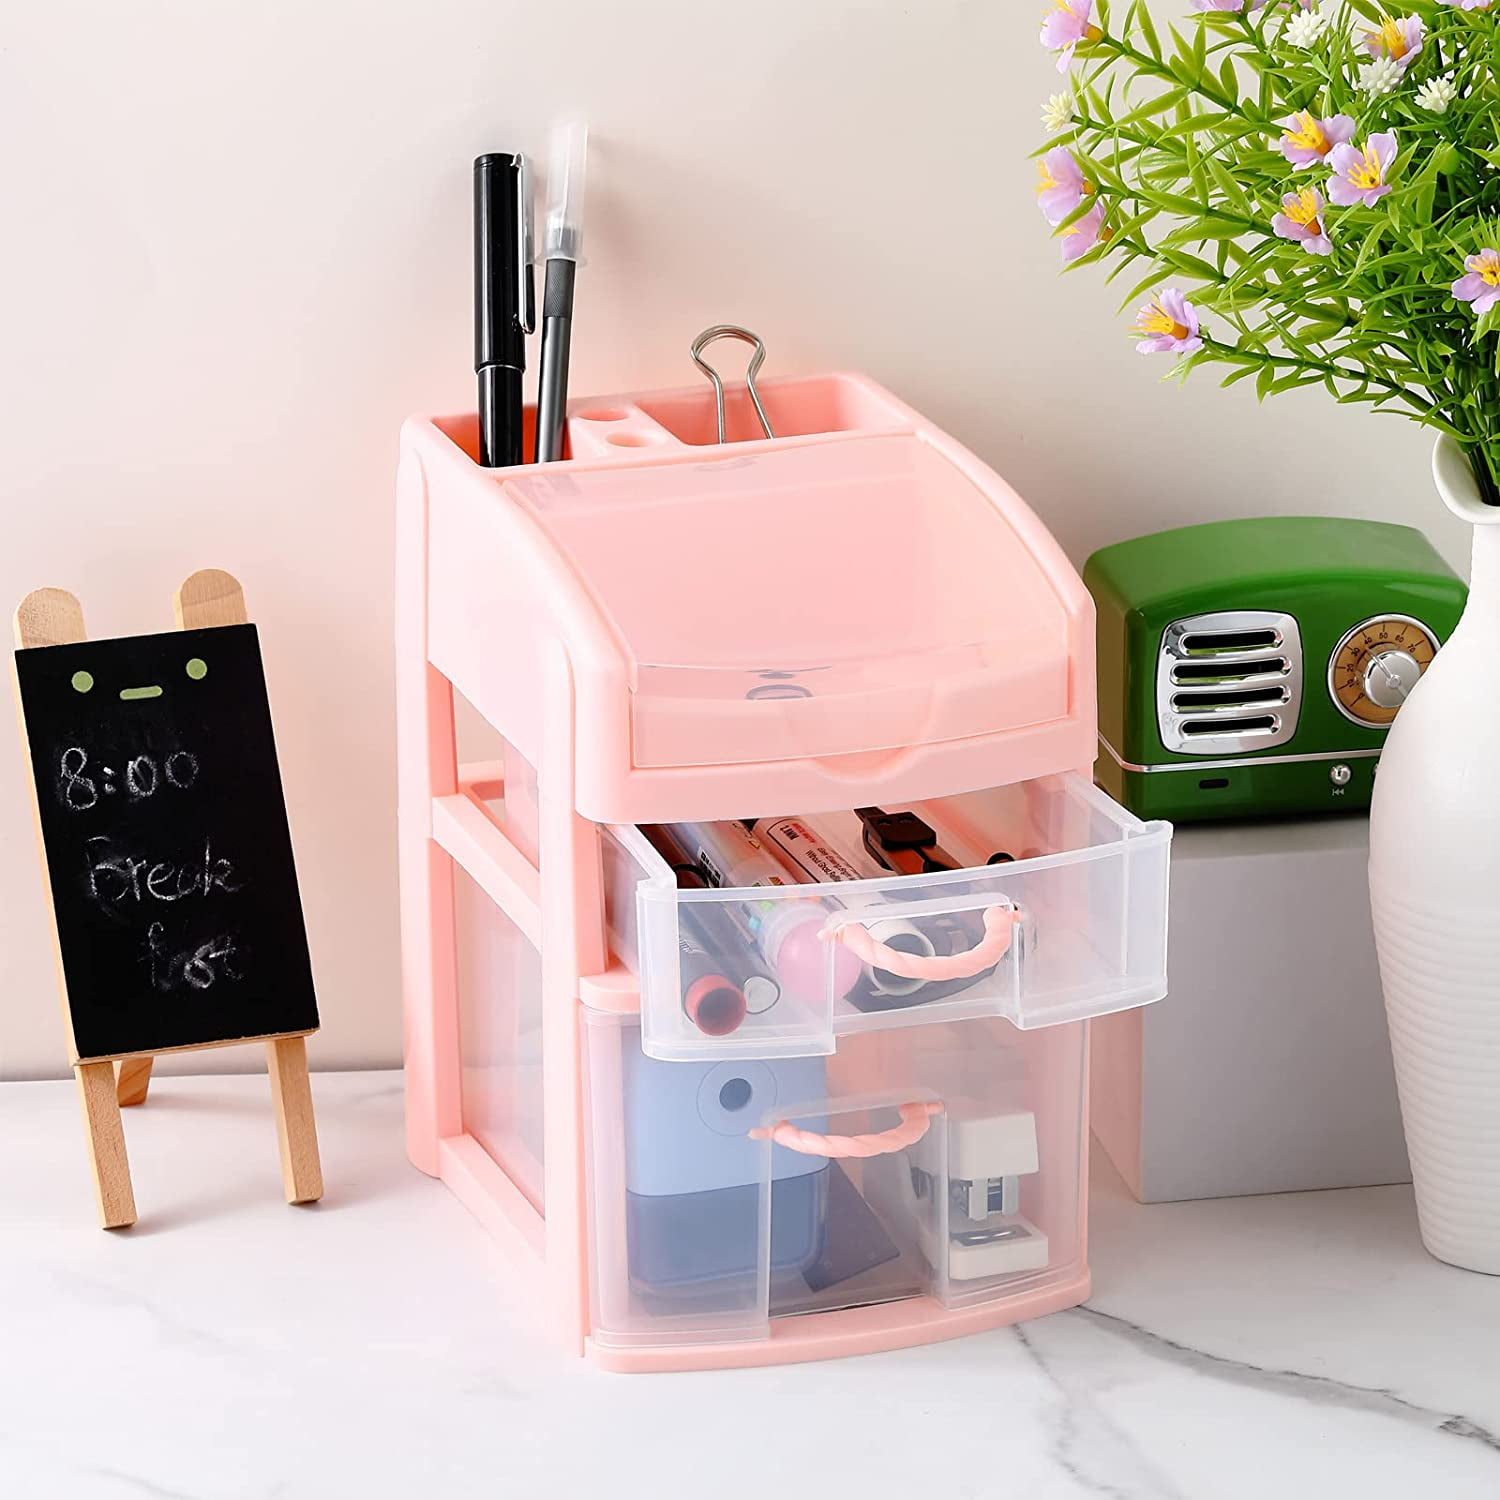 SITAKE Mini Plastic Drawer Organizer, Art Craft Organizers and Storage used in Desk, Vanity in Home or Office, 9 Removable Drawers for DIY Crafts, Art